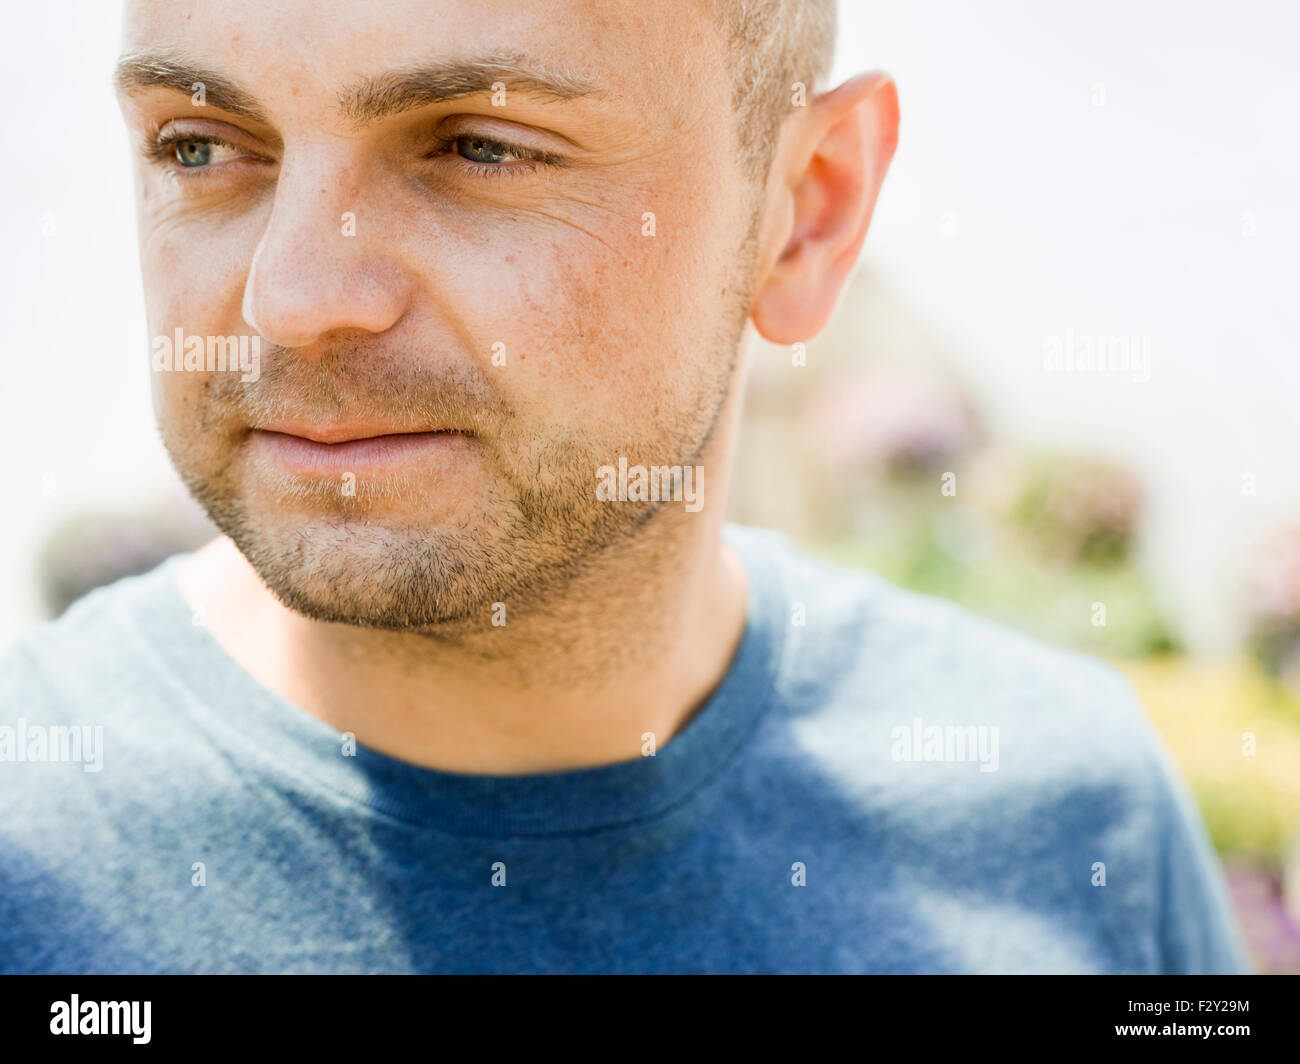 Head and shoulders portrait of a man with stubble in a blue teesirt. Stock Photo